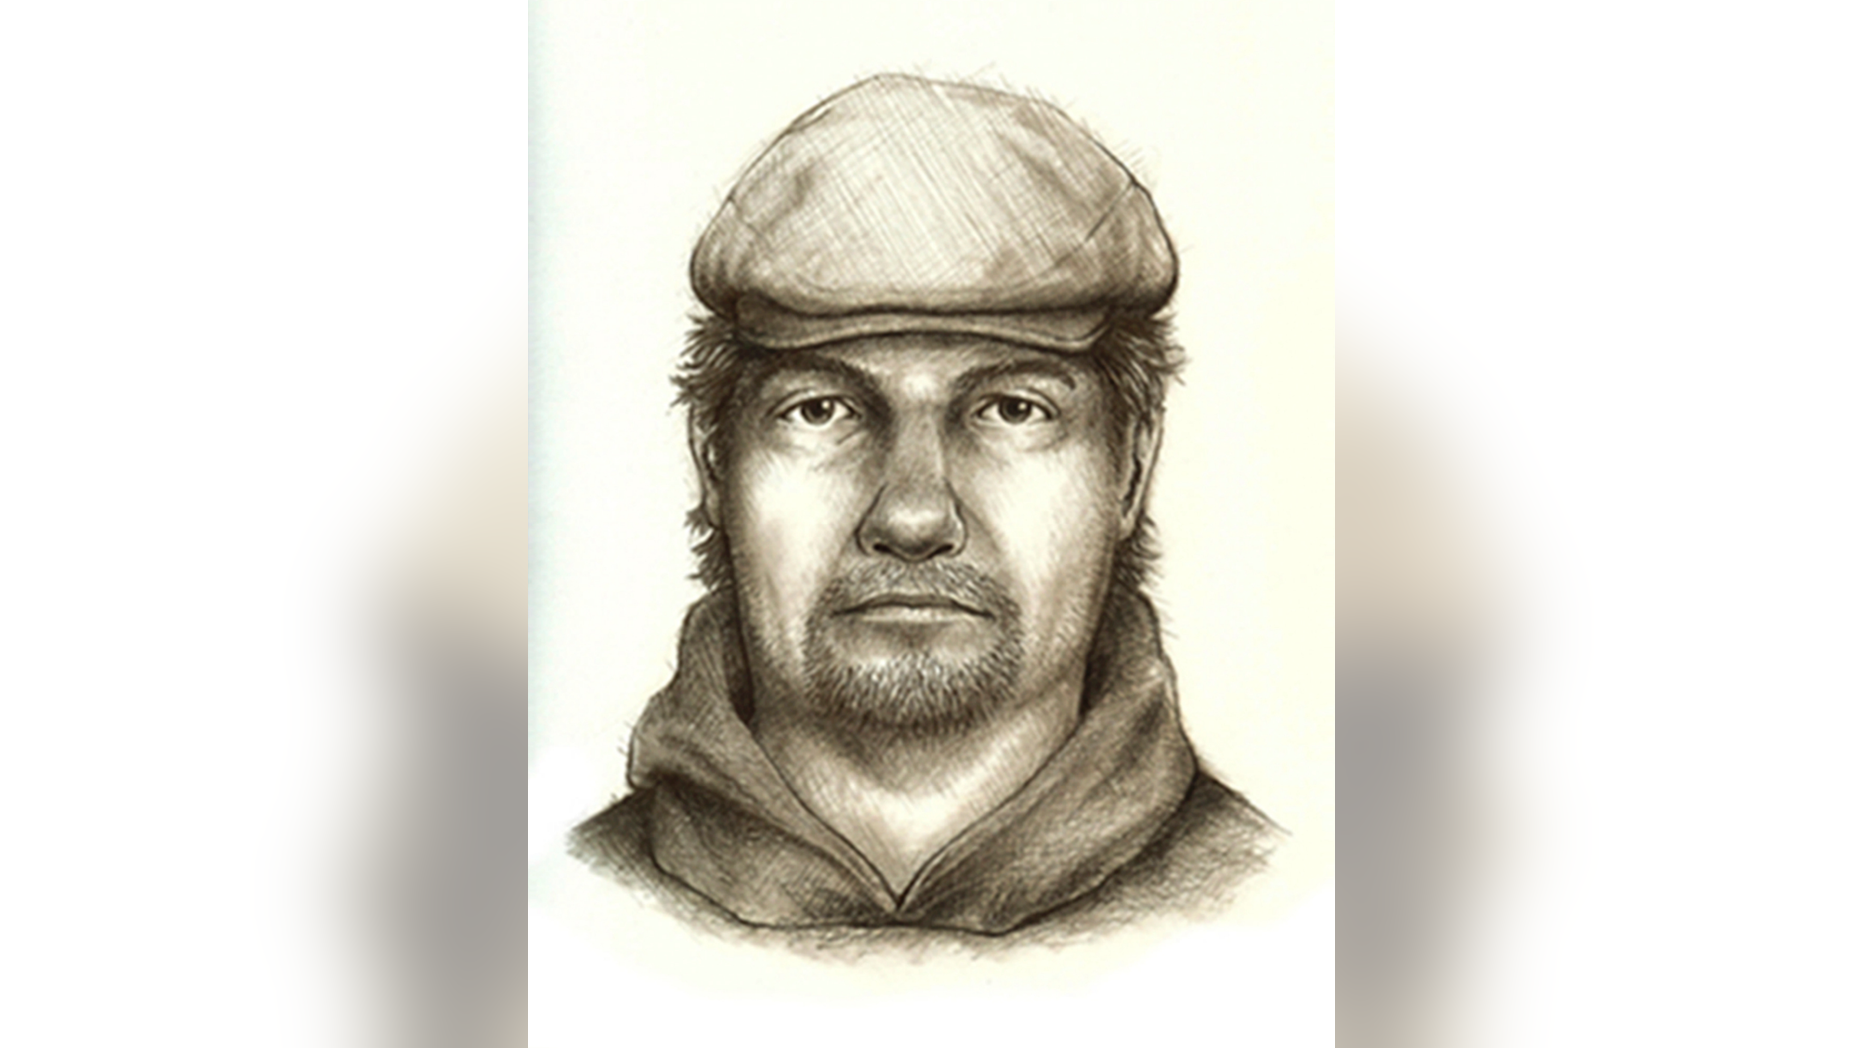 DOSSIER - This composite sketch published on July 17, 2017 by the Indiana State Police shows the man he considers to be the prime suspect in the murder of Liberty German teenagers. and Abigail Williams, missing from a hiking trail near their hometown of Delphi, in February 13, 2017. The state police must make an announcement regarding the investigation into the assassination in 2017, two girls found dead on a hiking trail. State police says Superintendent Doug Carter will discuss how the investigation was conducted in a 